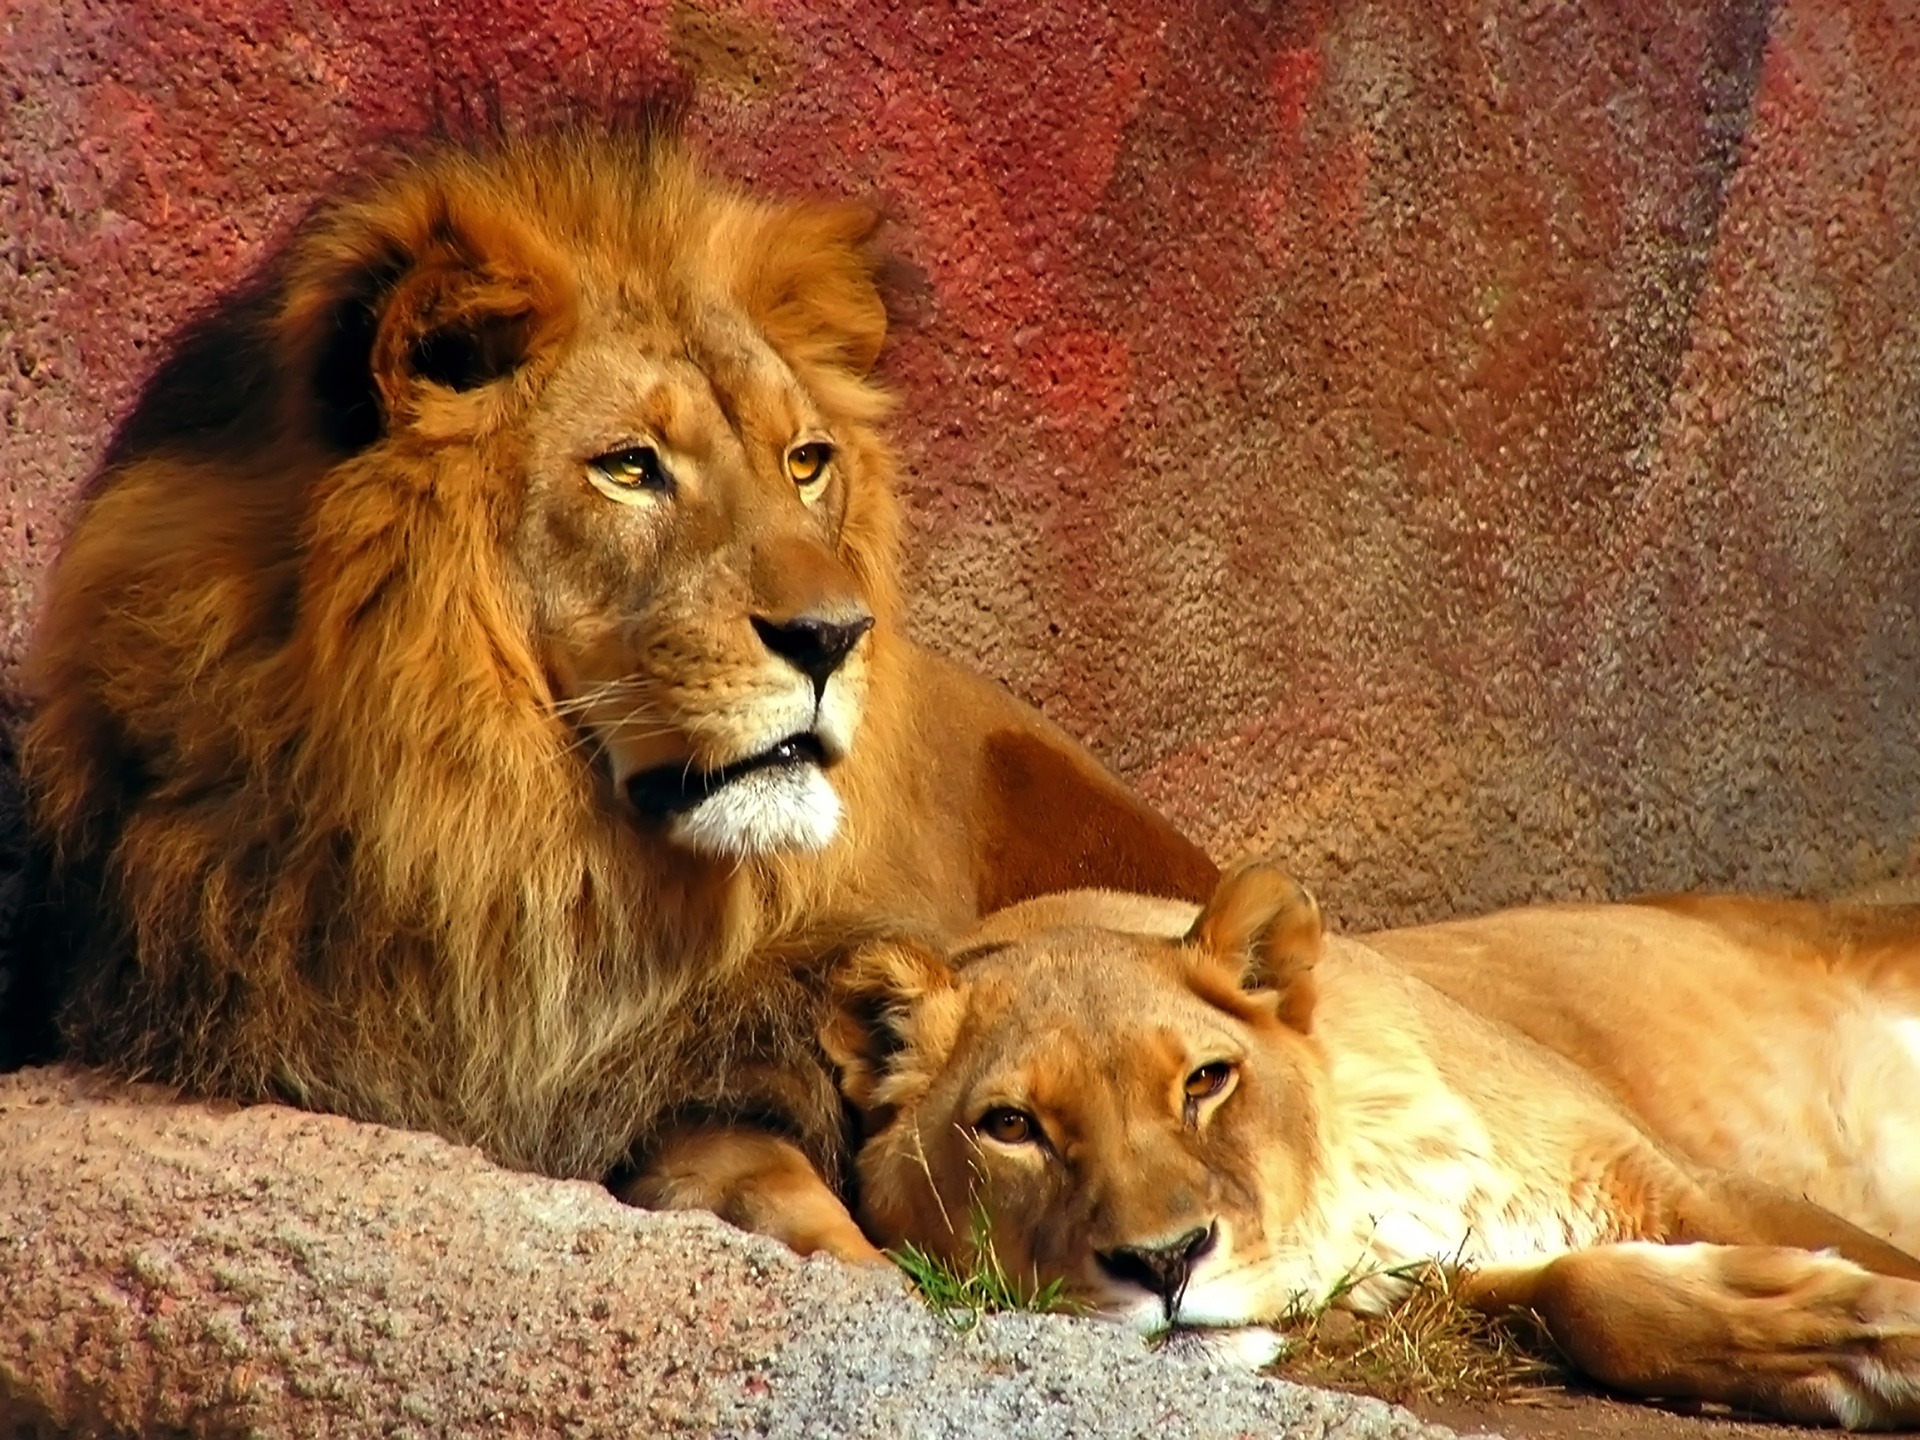 http://cinematicpassions.files.wordpress.com/2010/06/two-lions-lying-wallpapers_9732_1920x1440.jpg